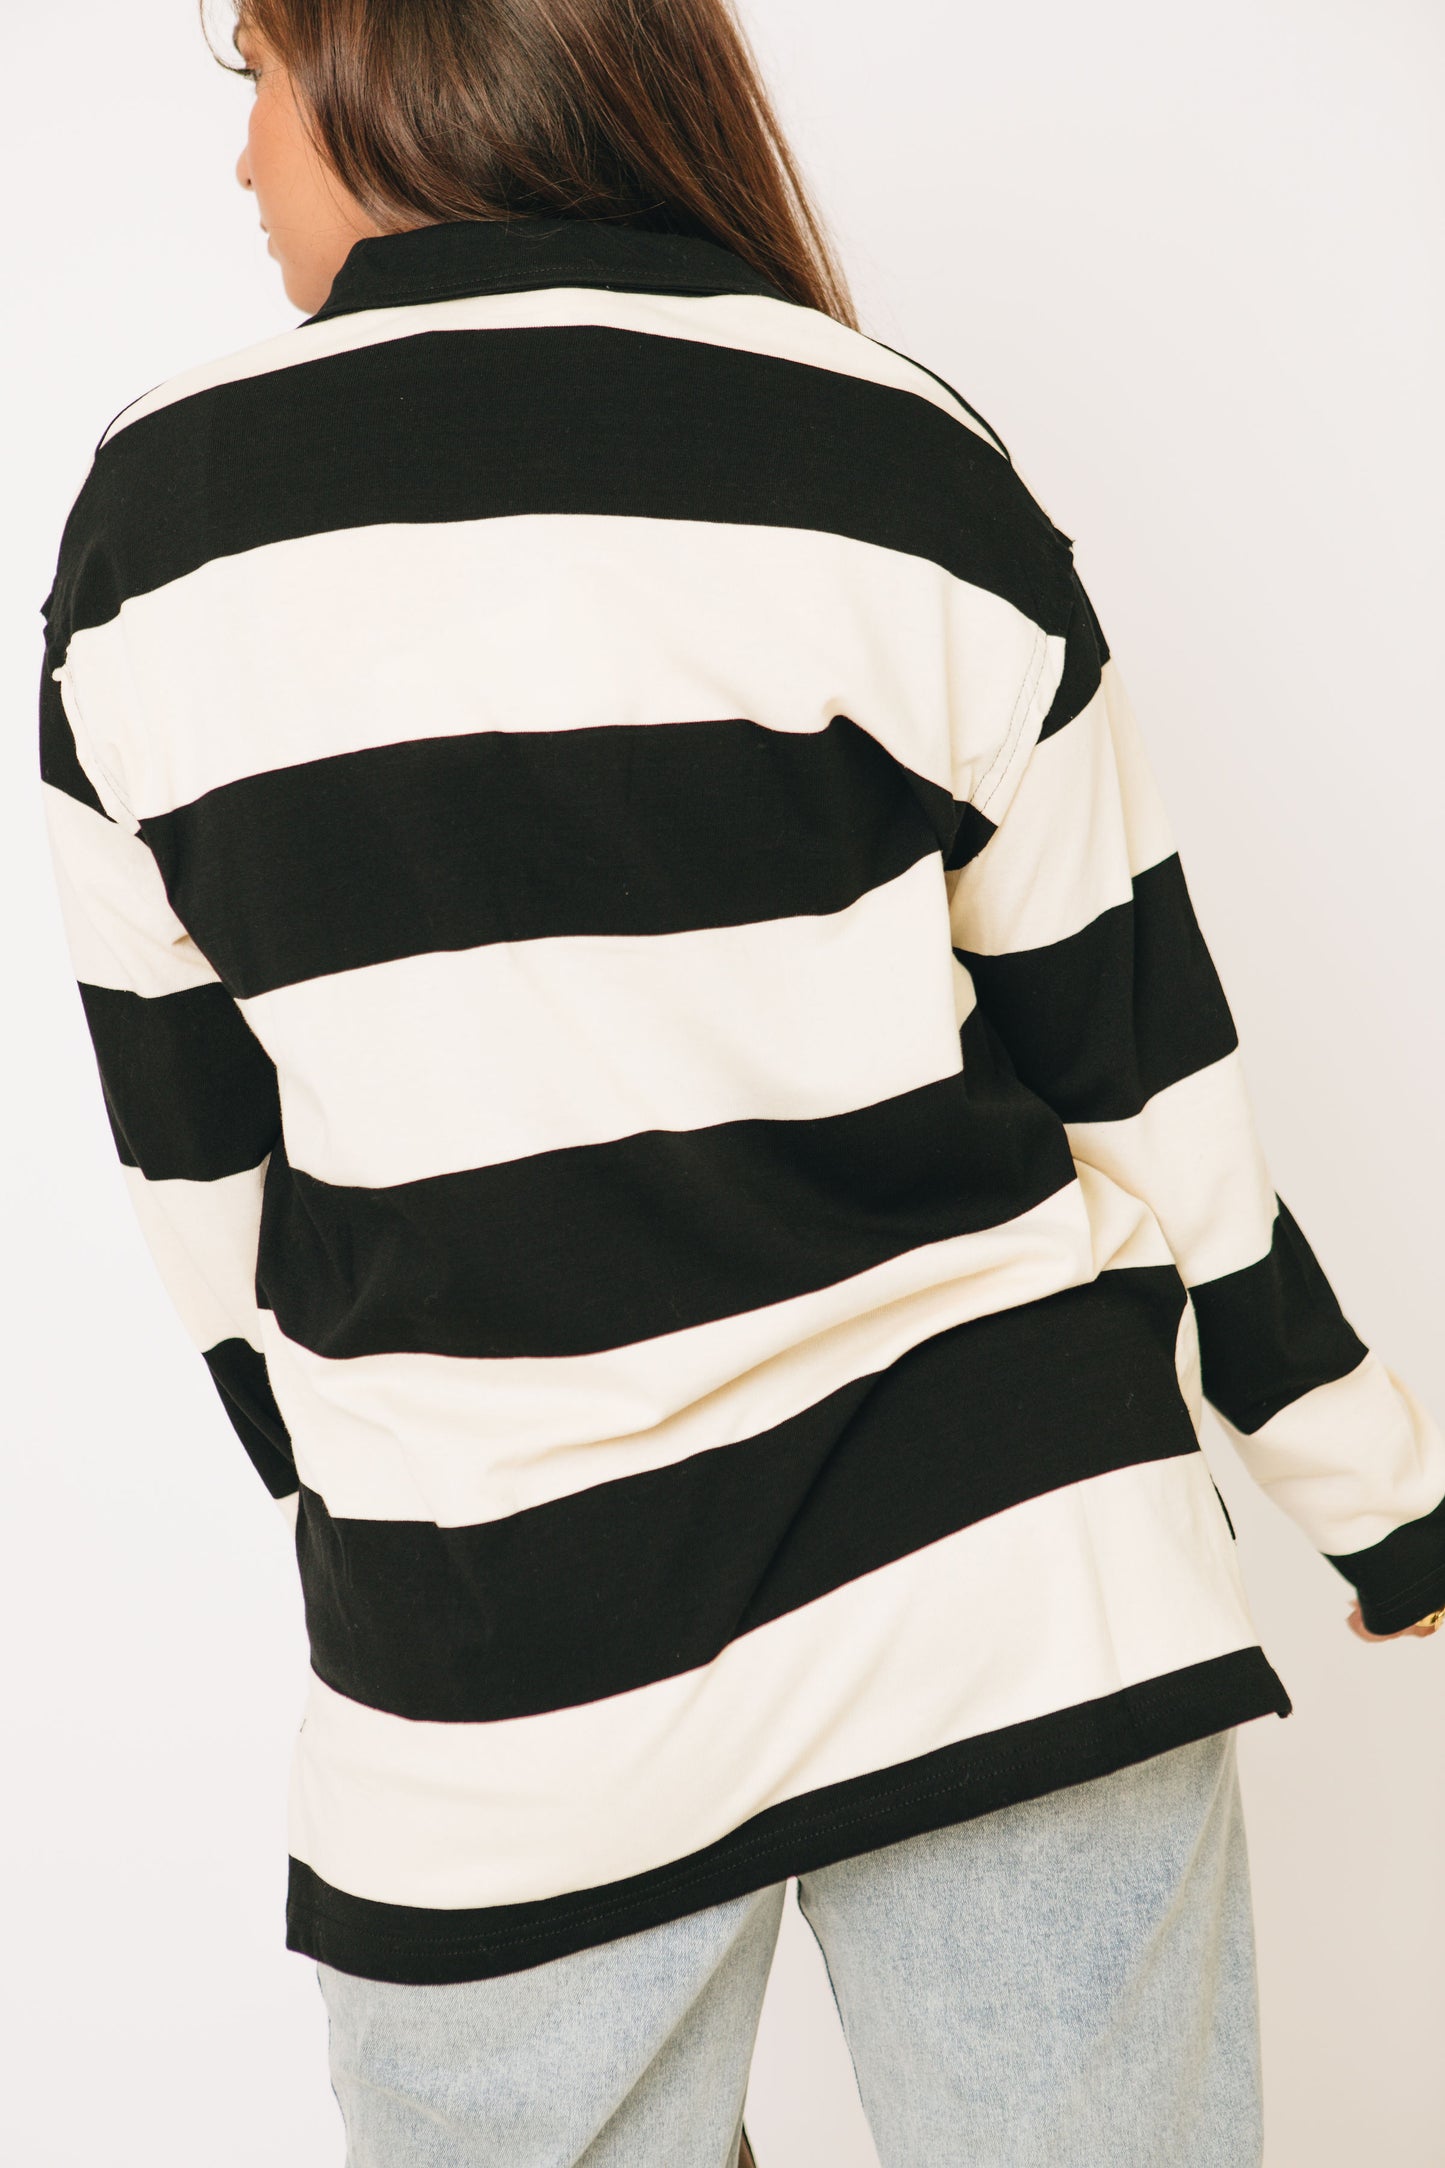 Jersey Knit Allover Striped Long Sleeve Top (S-3XL)